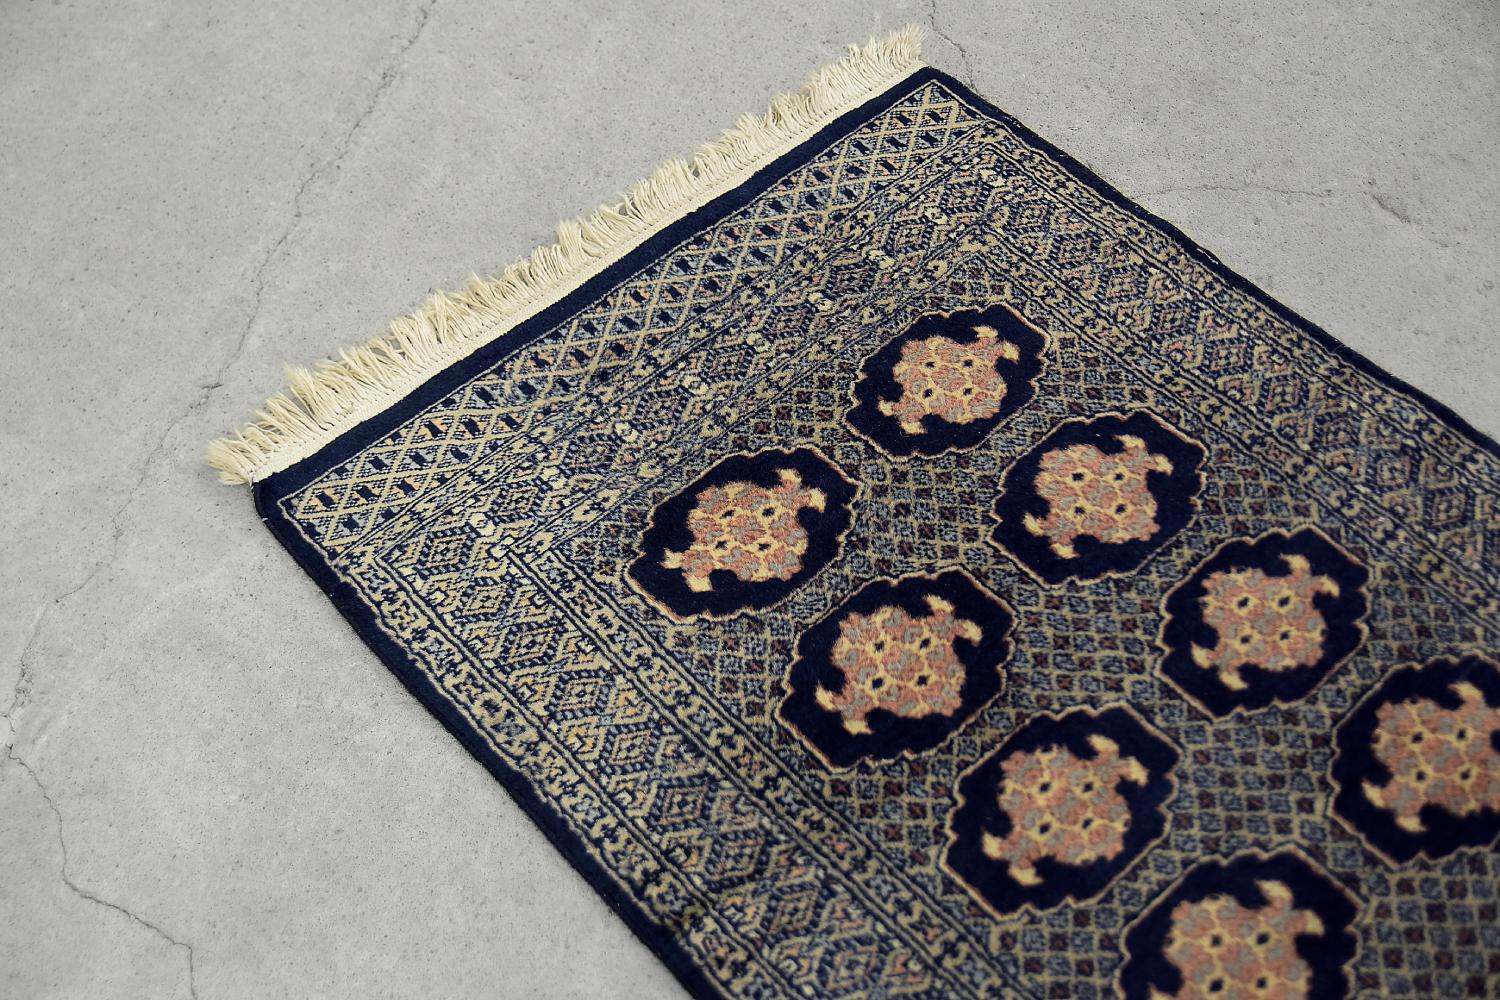 This hand-woven oriental carpet was made in Pakistan during the 1960s for Ikea. Traditionally flat woven and dyed in shades of navy blue and beige. It was woven using natural wool and cotton. Due to the appropriate treatment, the wool has a